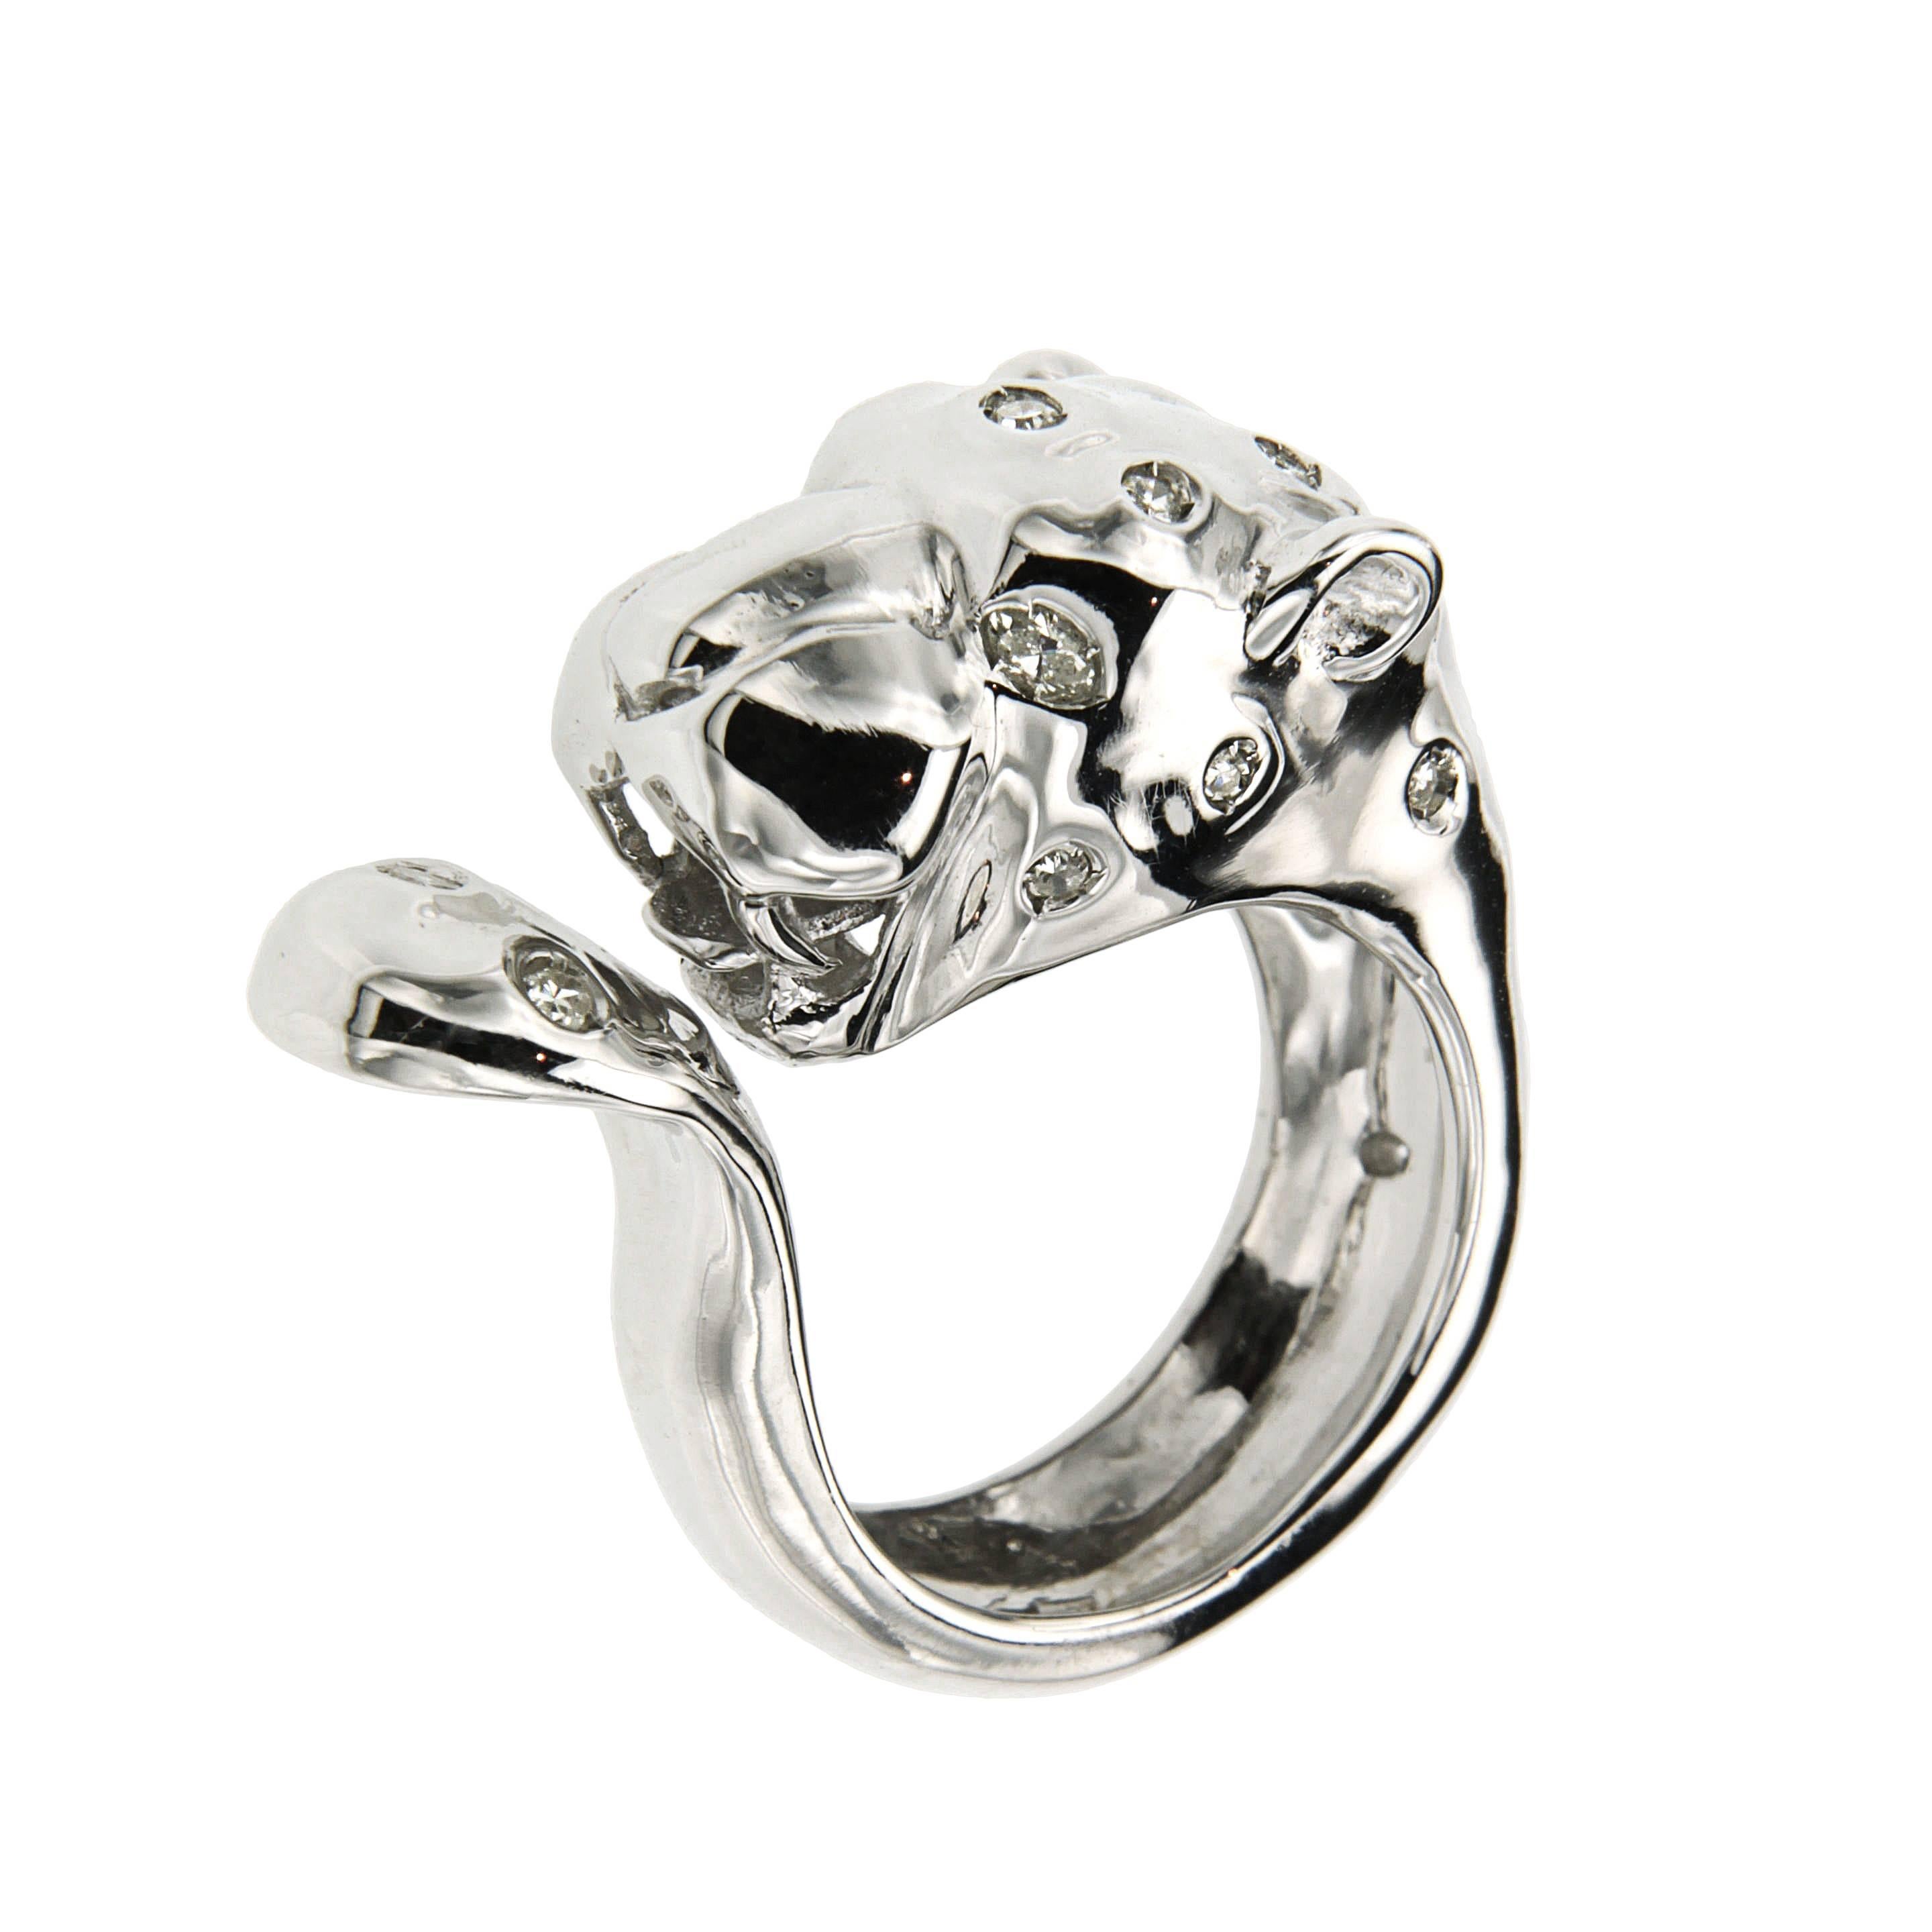 Diamonds 18 Kt White Gold Cheetah Ring Handcrafted in Italy by Botta Gioielli For Sale